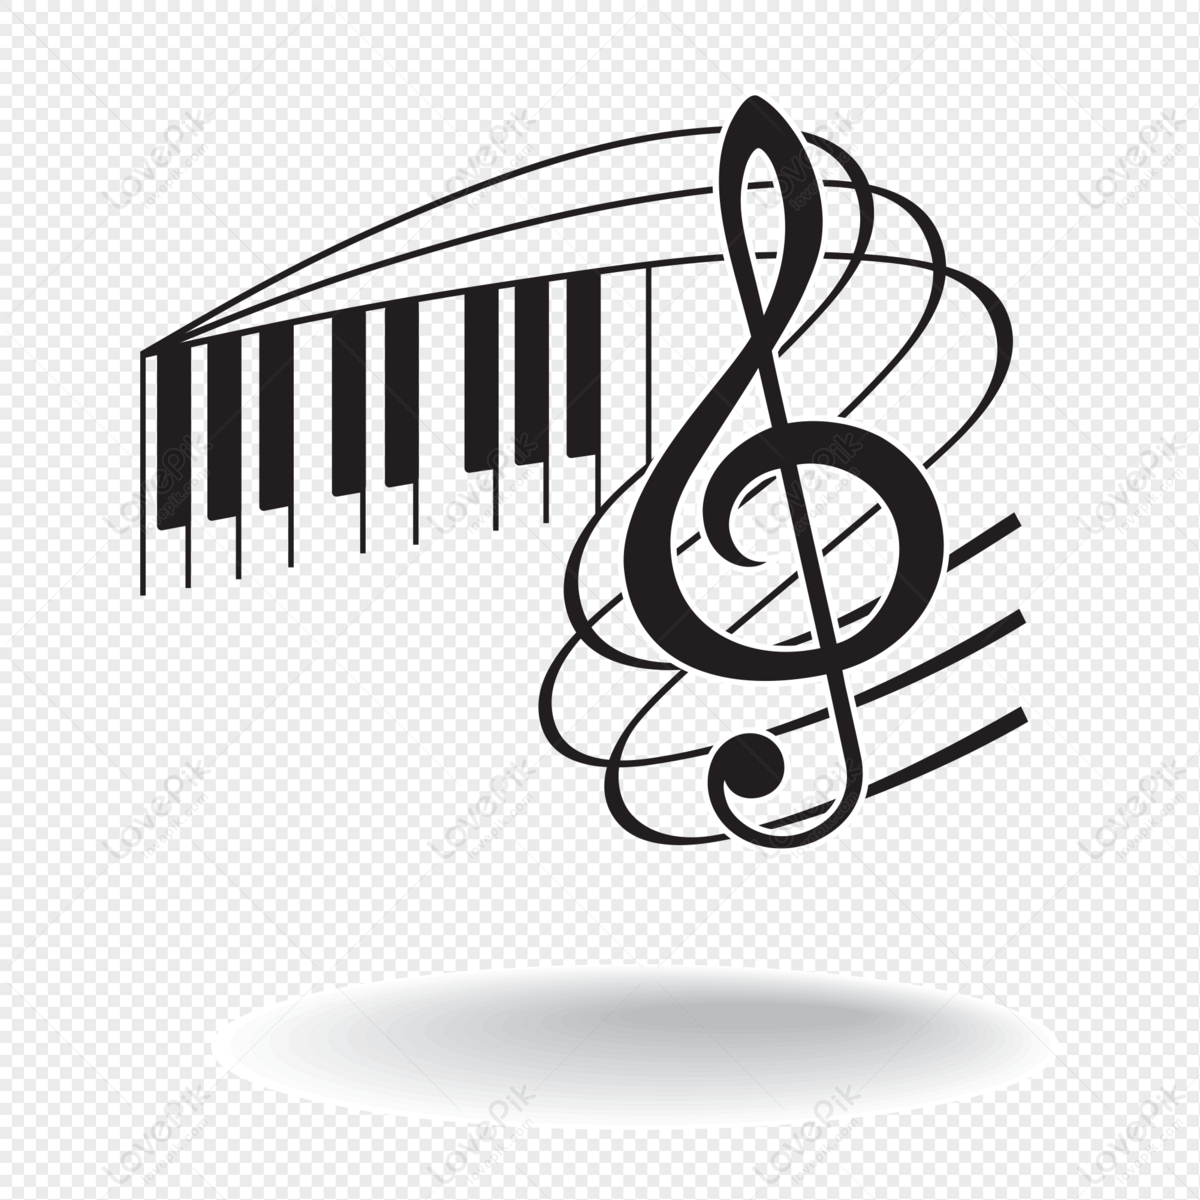 Piano Music Symbol PNG White Transparent And Clipart Image For Free  Download - Lovepik | 401568052